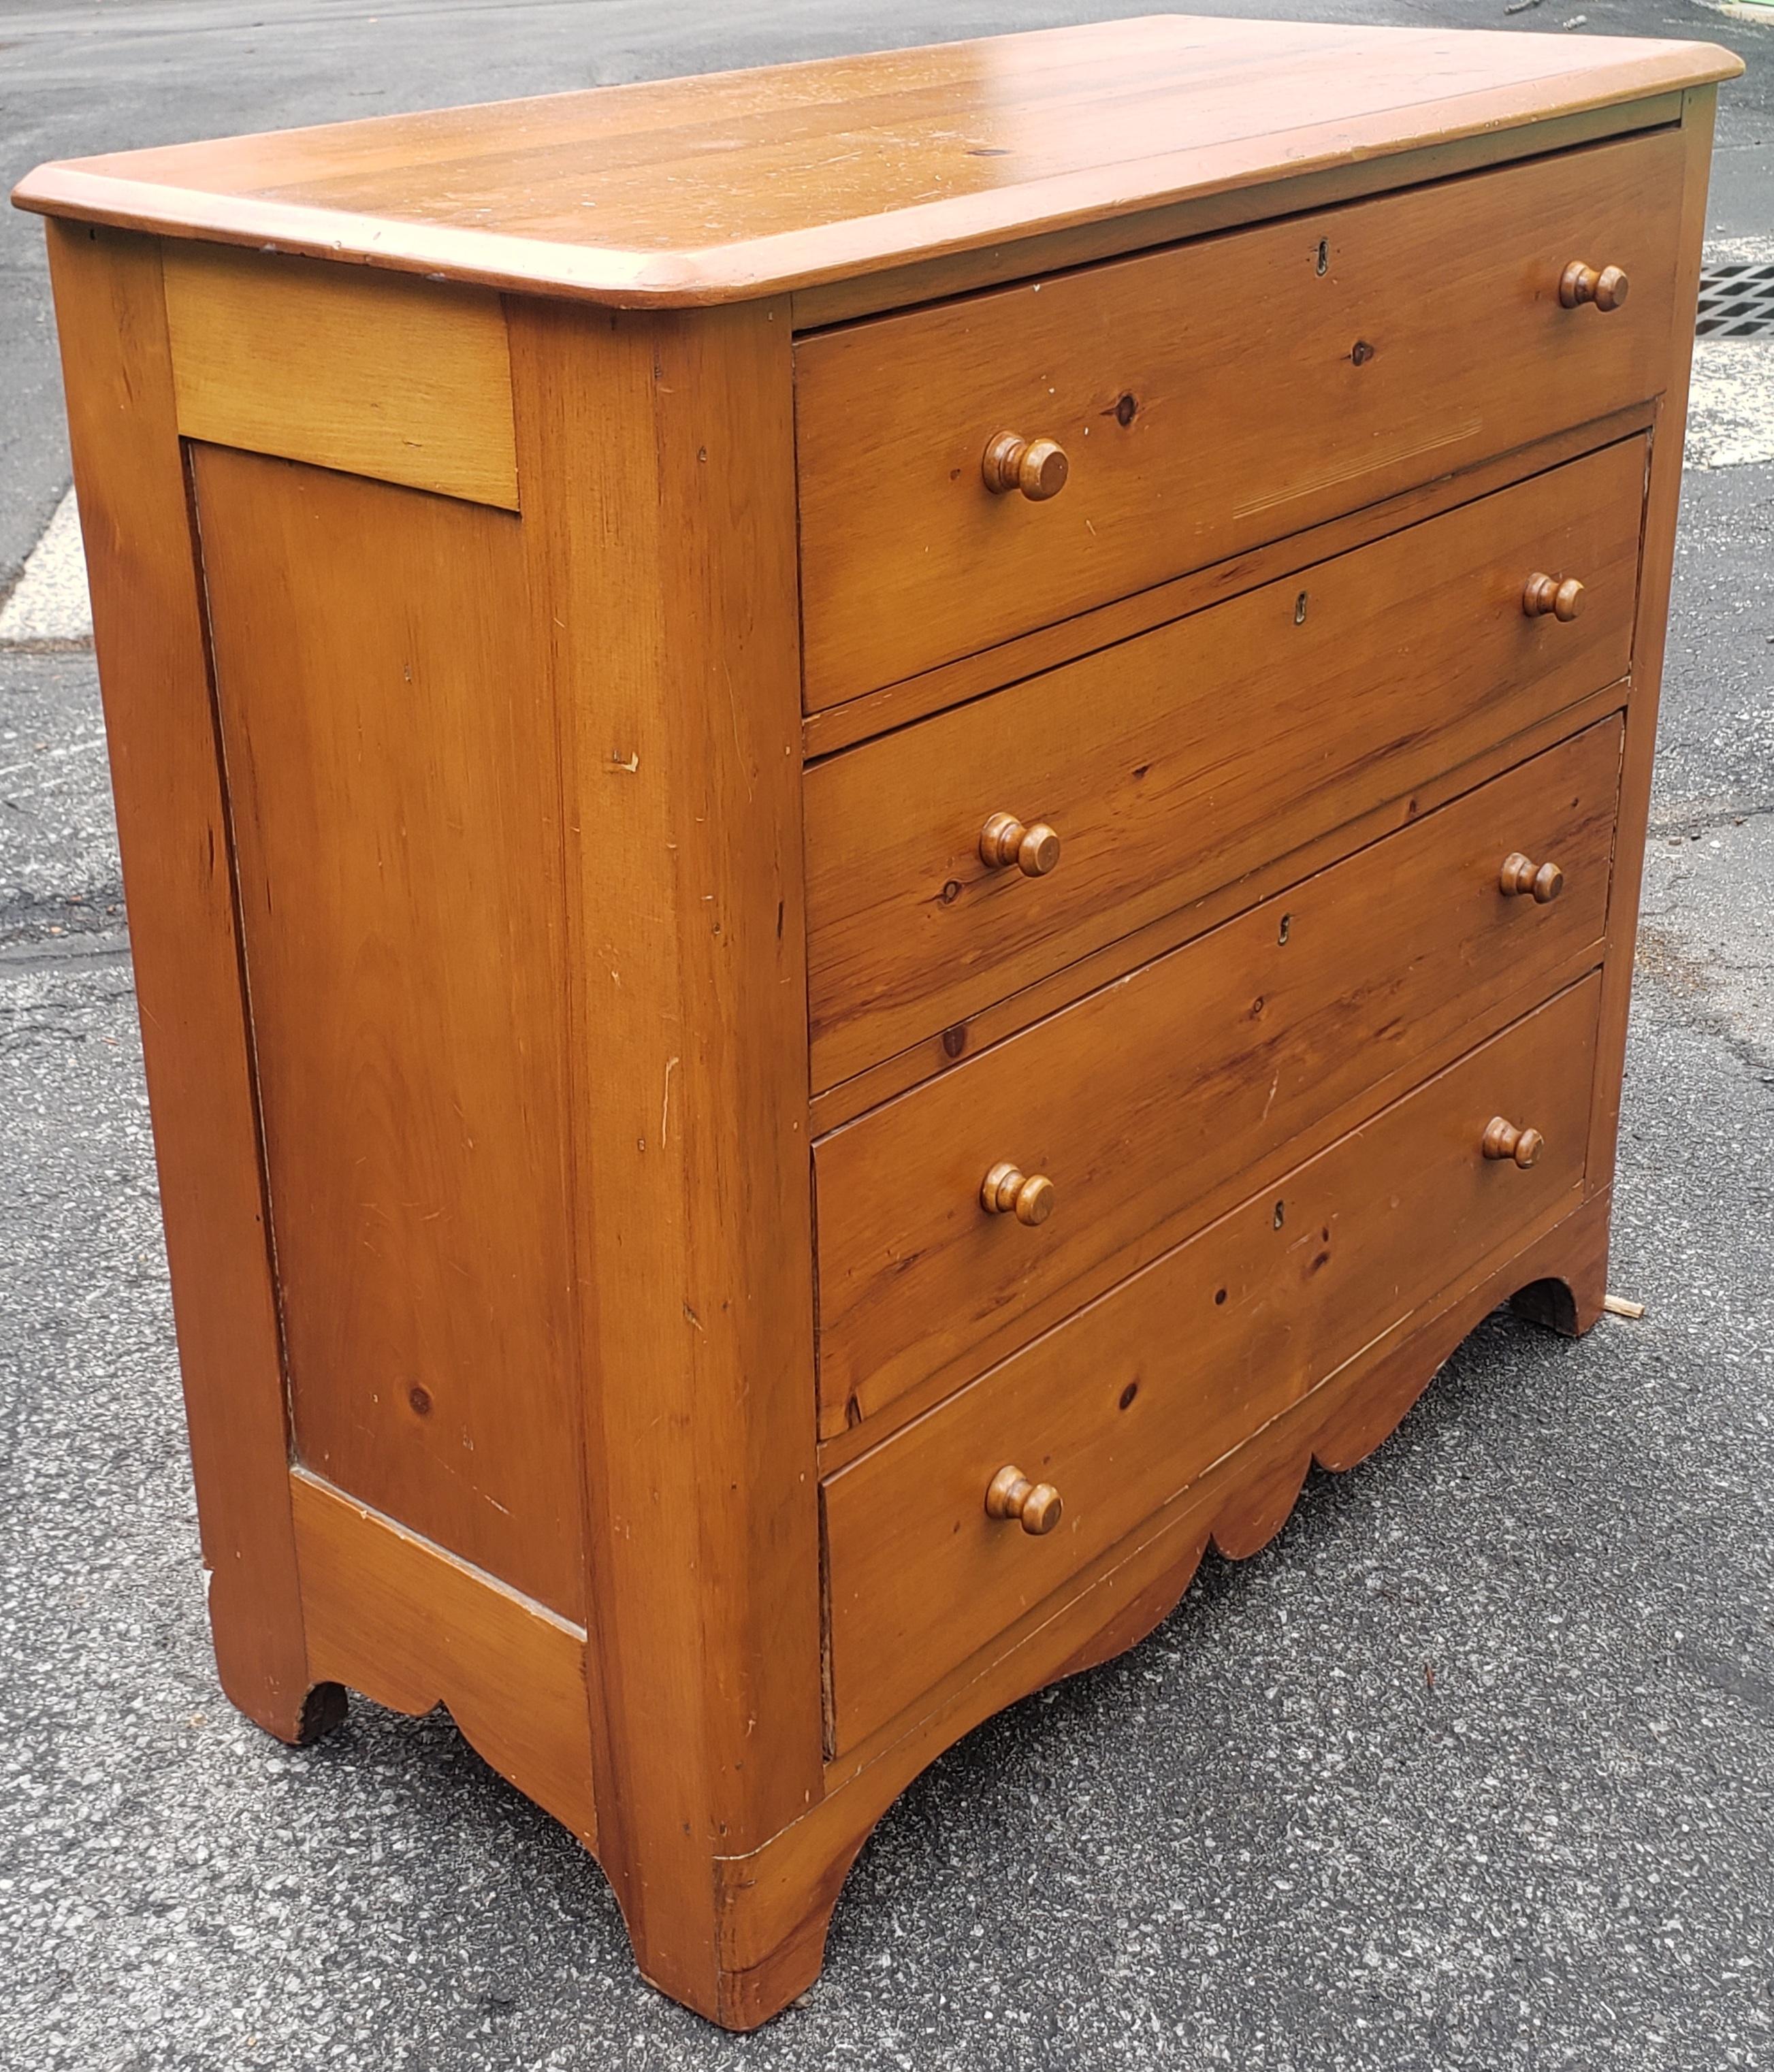 A 19th Century Victorian Solid Pine 4 - drawers chest of drawers. Recently refinished.
Measures 38.75